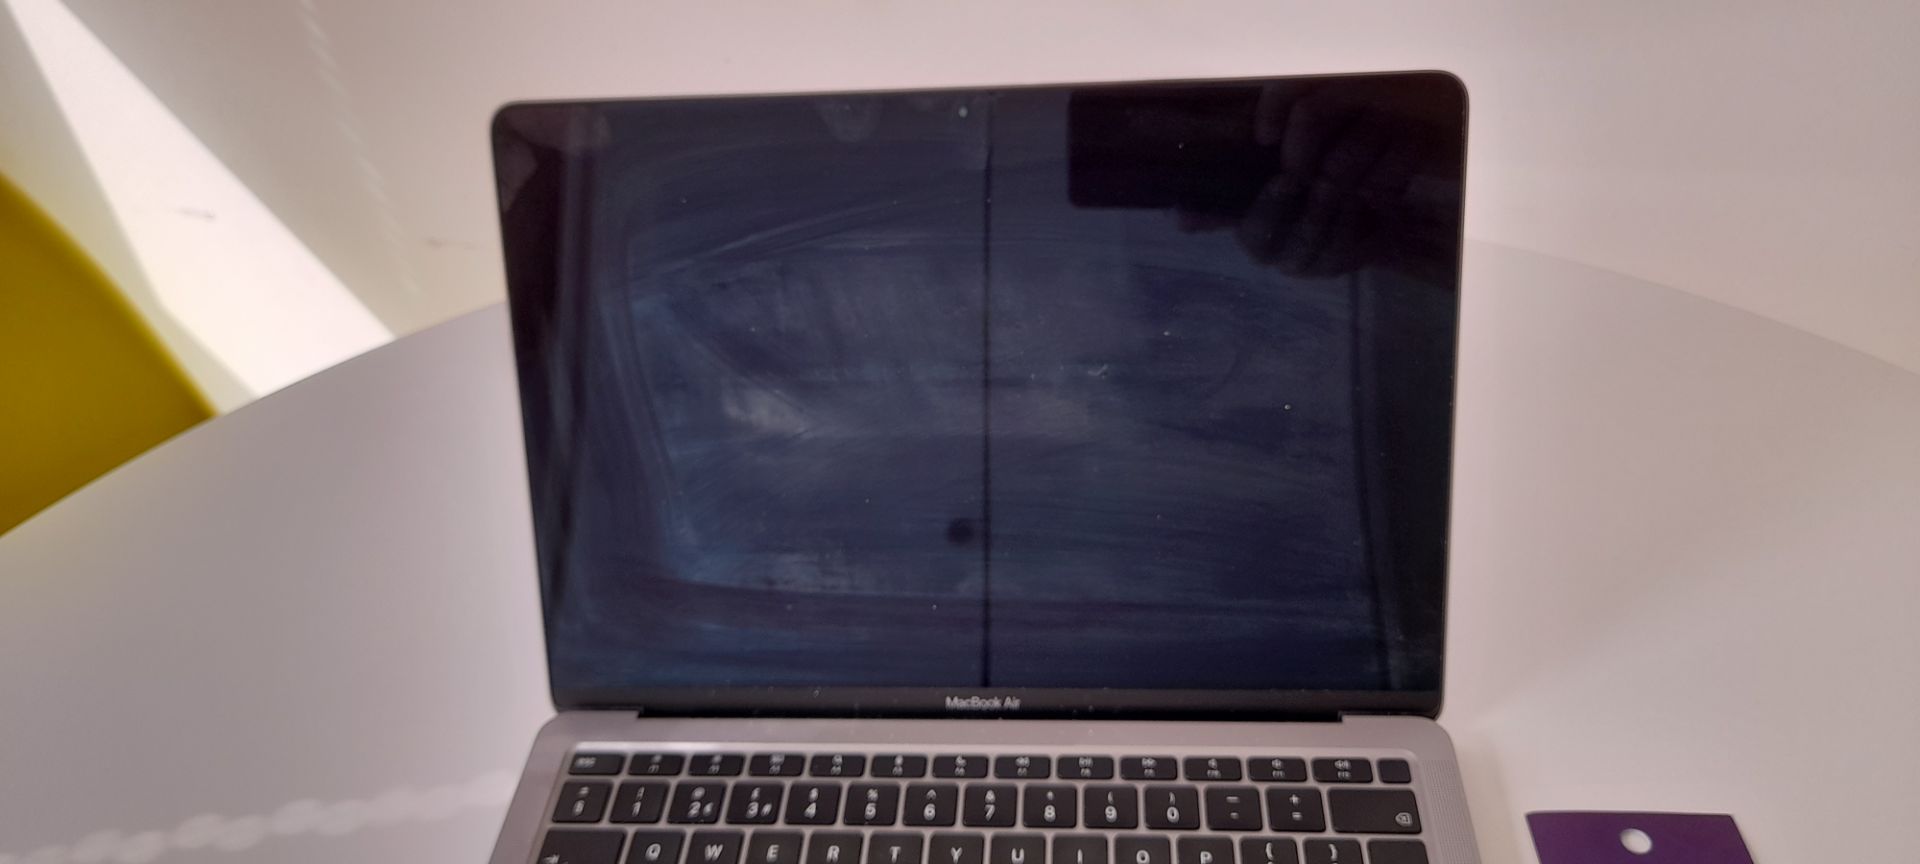 Apple MacBook Air Model A2337 EMC 3598. S/N C02FC92BQ6L4. Collection from Canary Wharf, London, E14 - Image 3 of 7